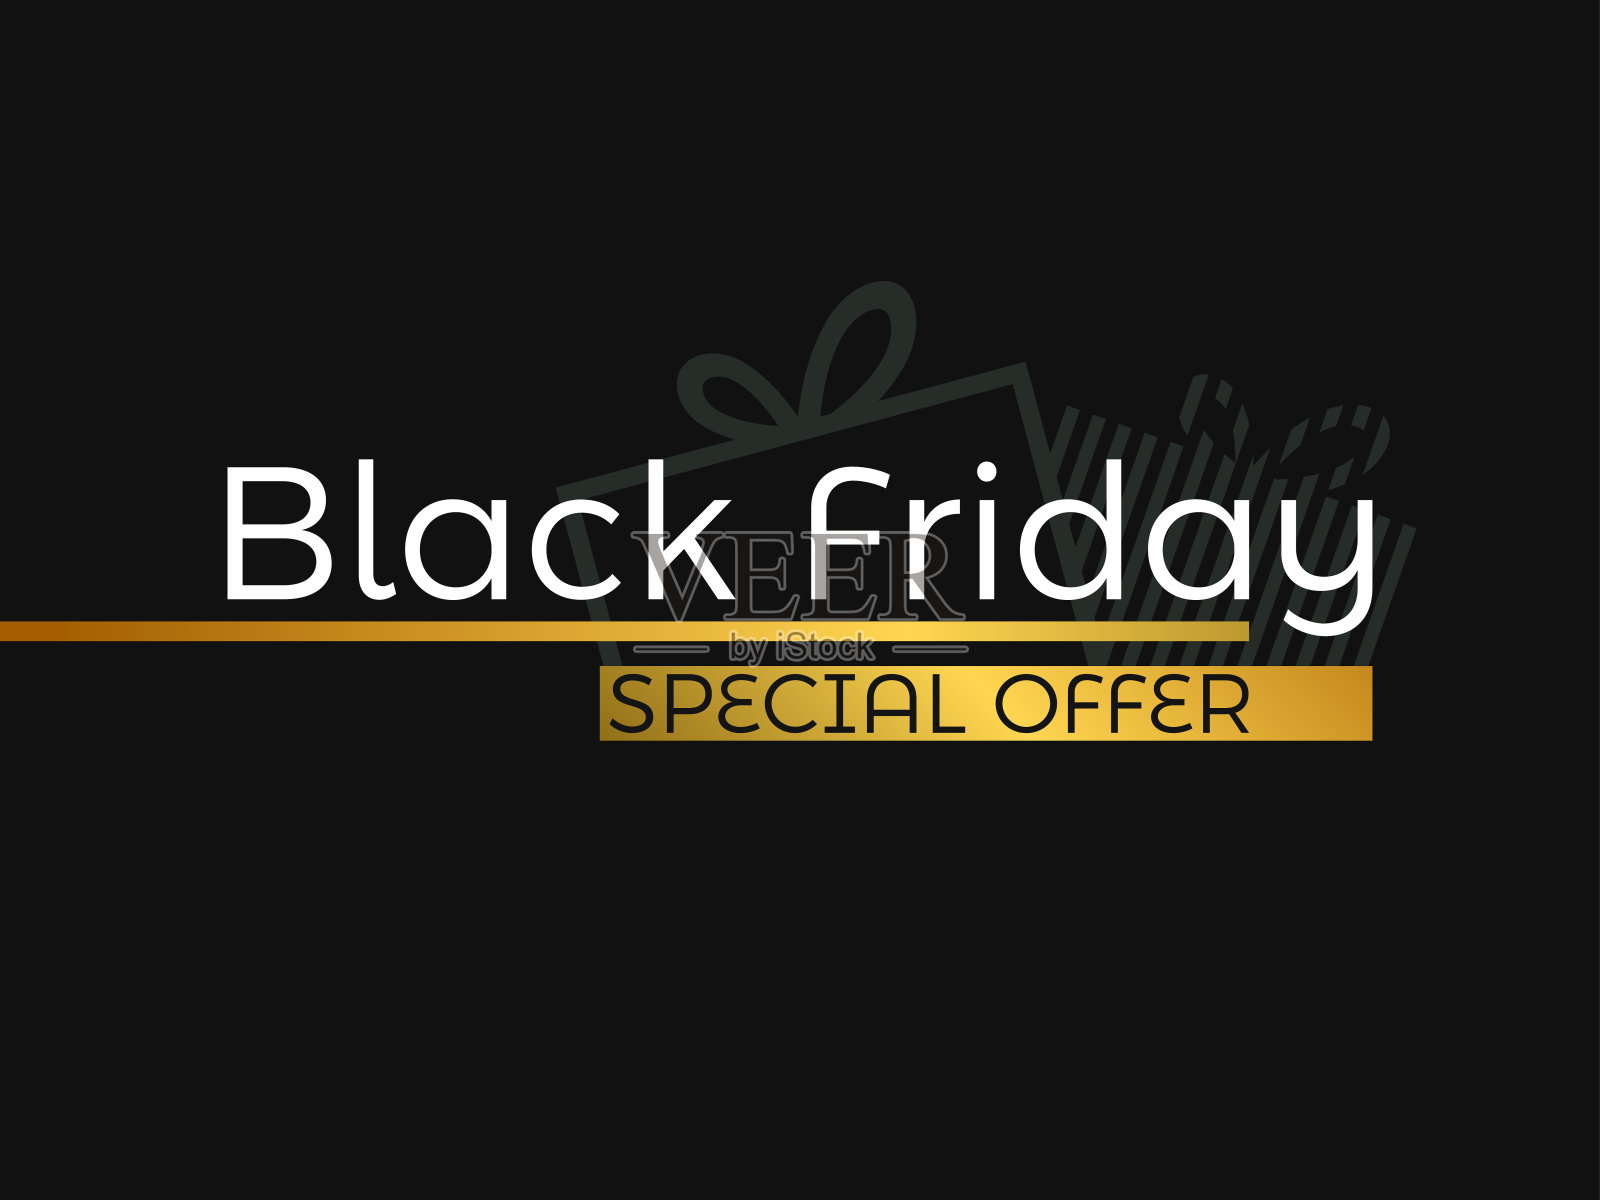 Black Friday special offer gold color. Gift boxes with bows on a black background. Design for promotional items, banner, flyers and gift cards. Vector illustration背景图片素材